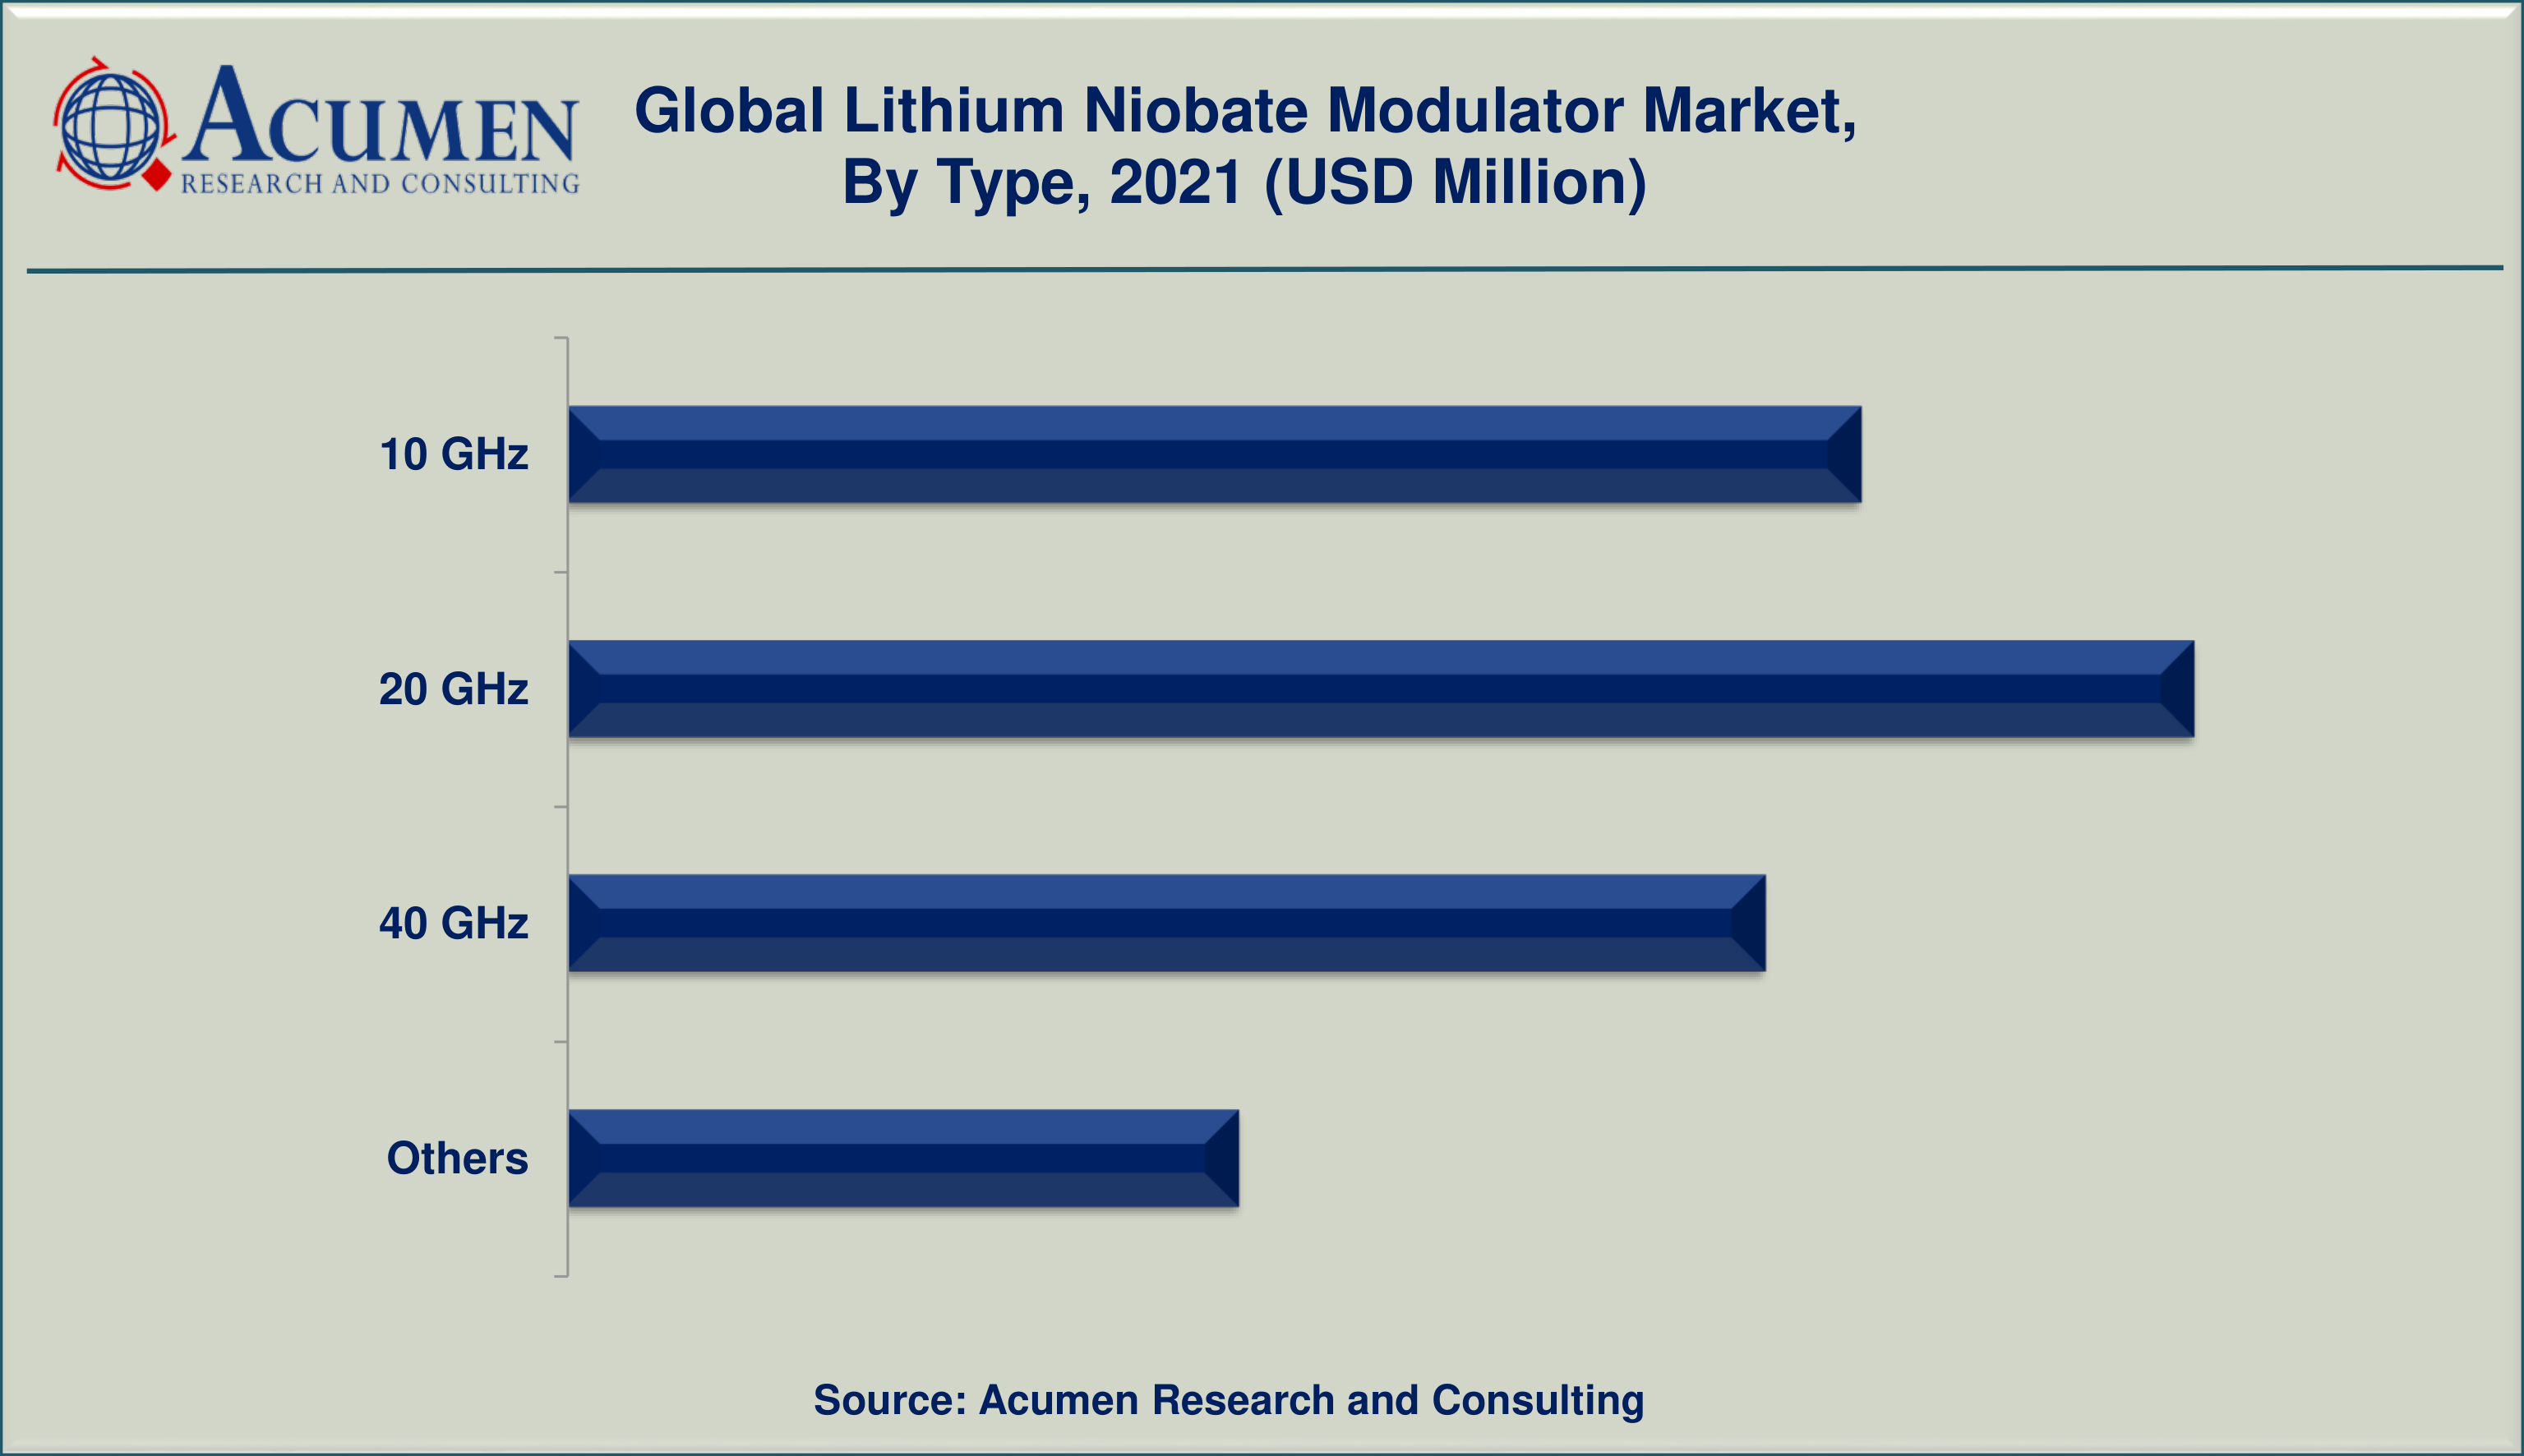 Lithium Niobate Modulator Market By Type is projected to achieve a market size of USD 6,943 Million by 2030 budding at a CAGR of 6.8%